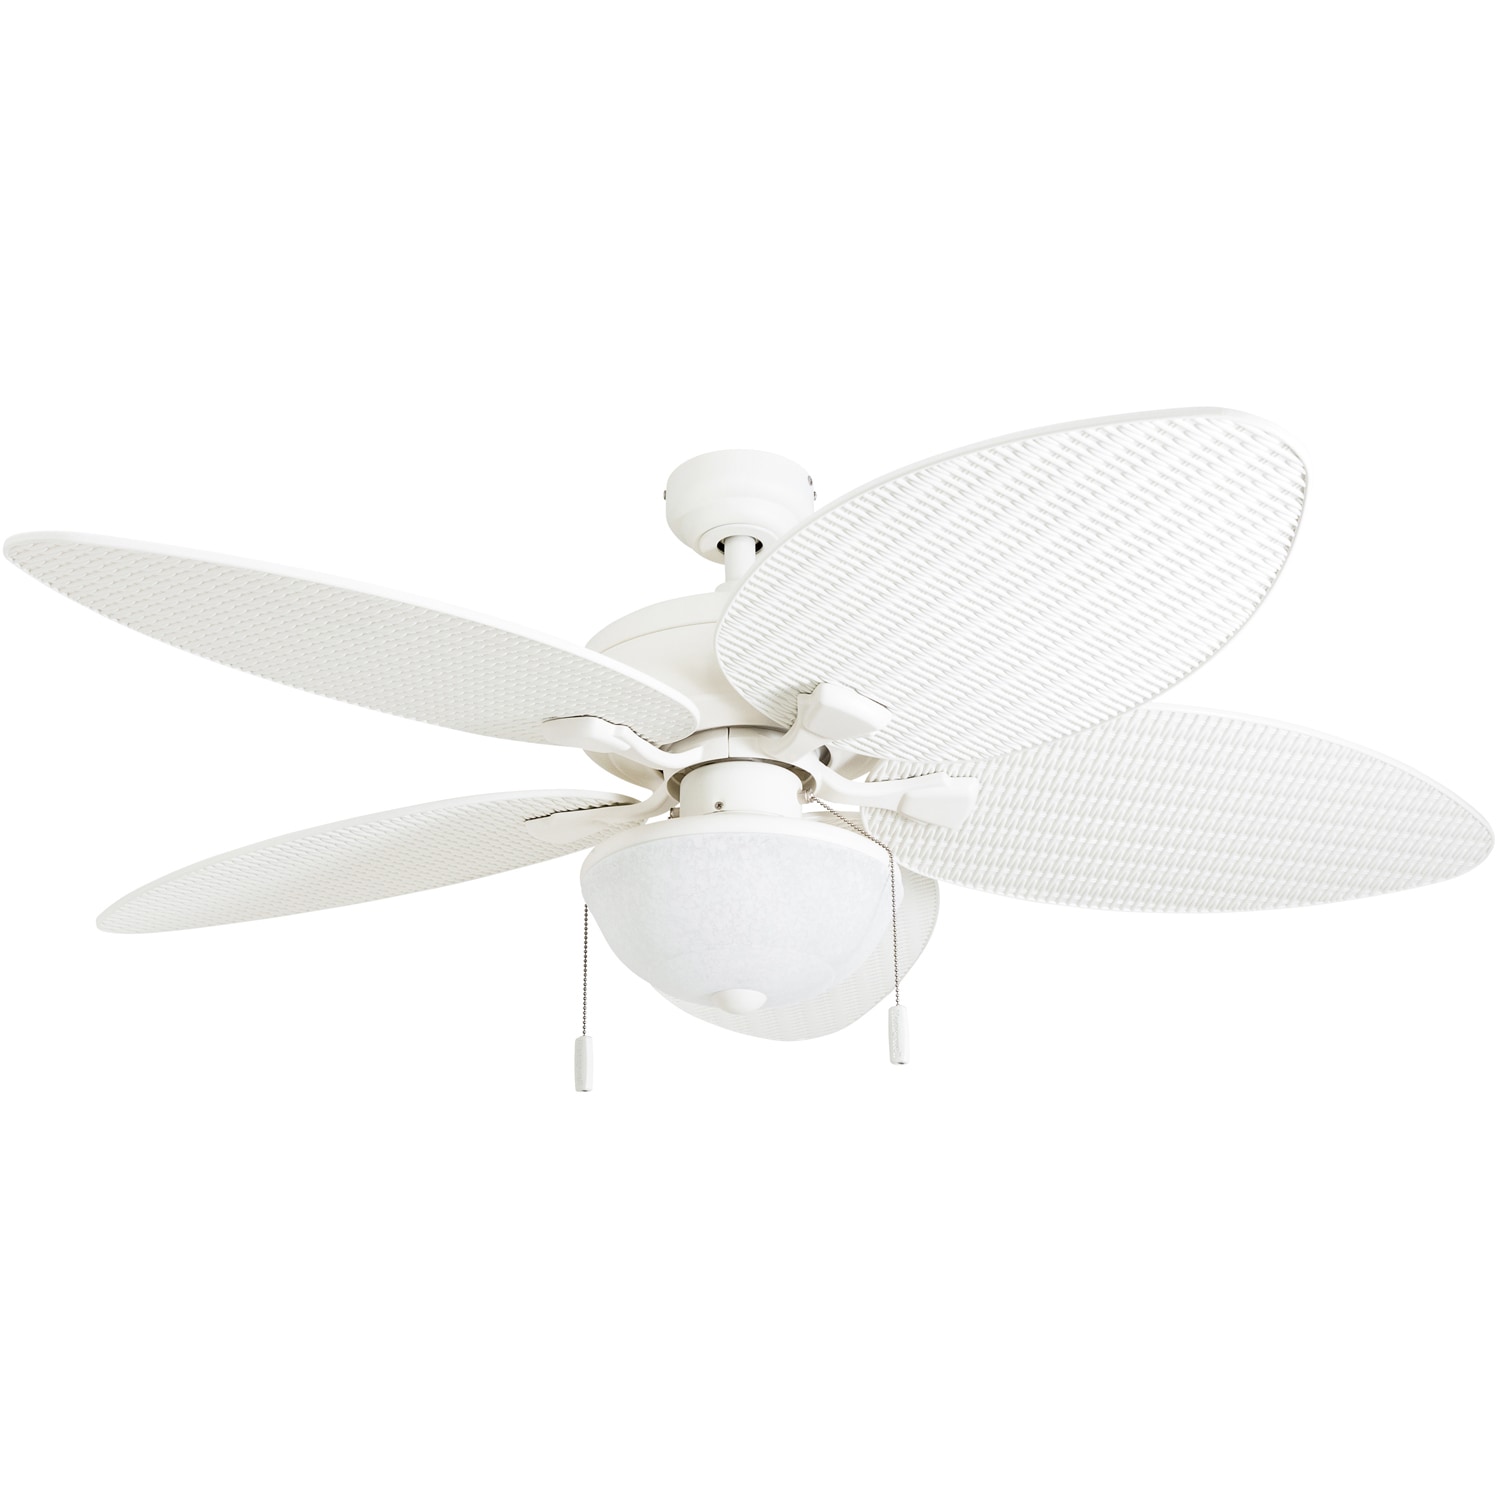 Honeywell Inland Breeze Bronze Outdoor LED Ceiling Fan With Light And Blades 